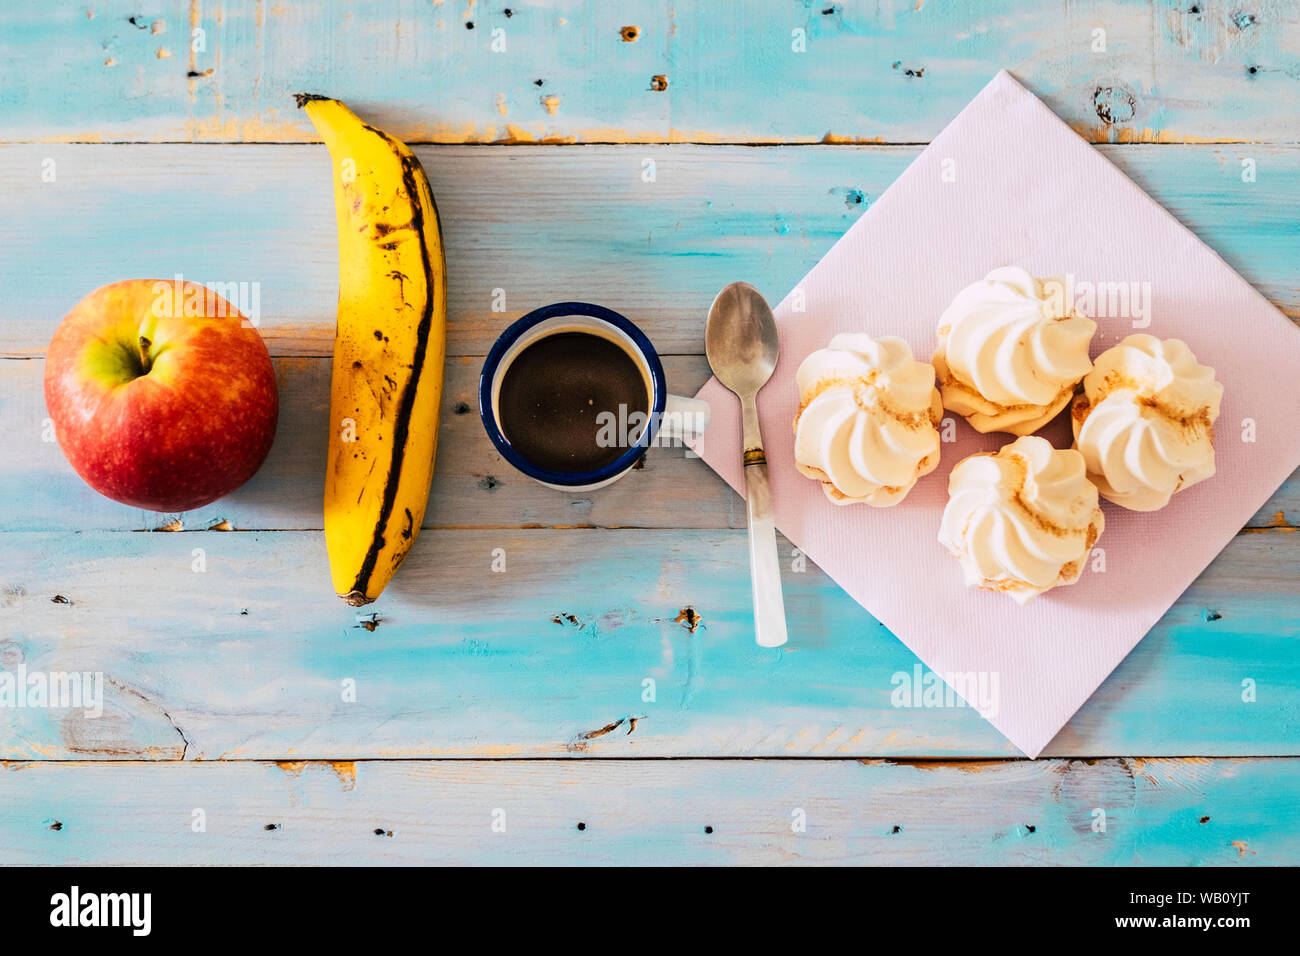 coloured background with fresh food - closeup of some food in a blue table background - table of wood with an apple, banana, coffe and macarones on it Stock Photo